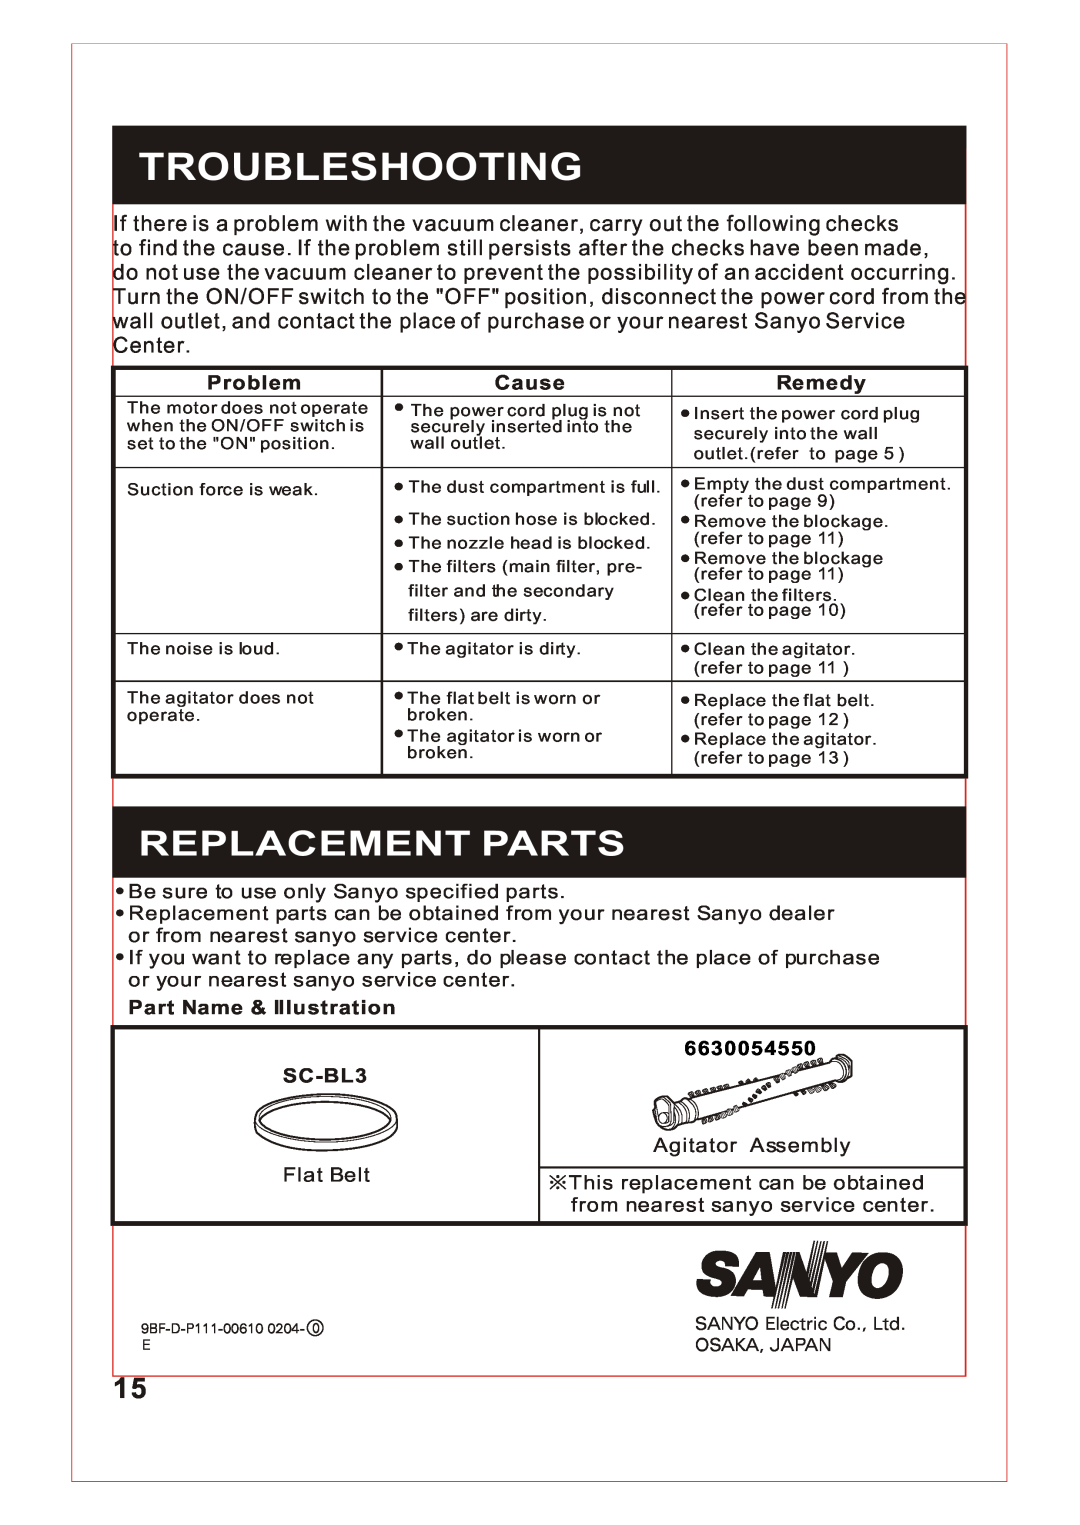 Sanyo SC-X90 instruction manual Troubleshooting, Center, Replacement Parts 